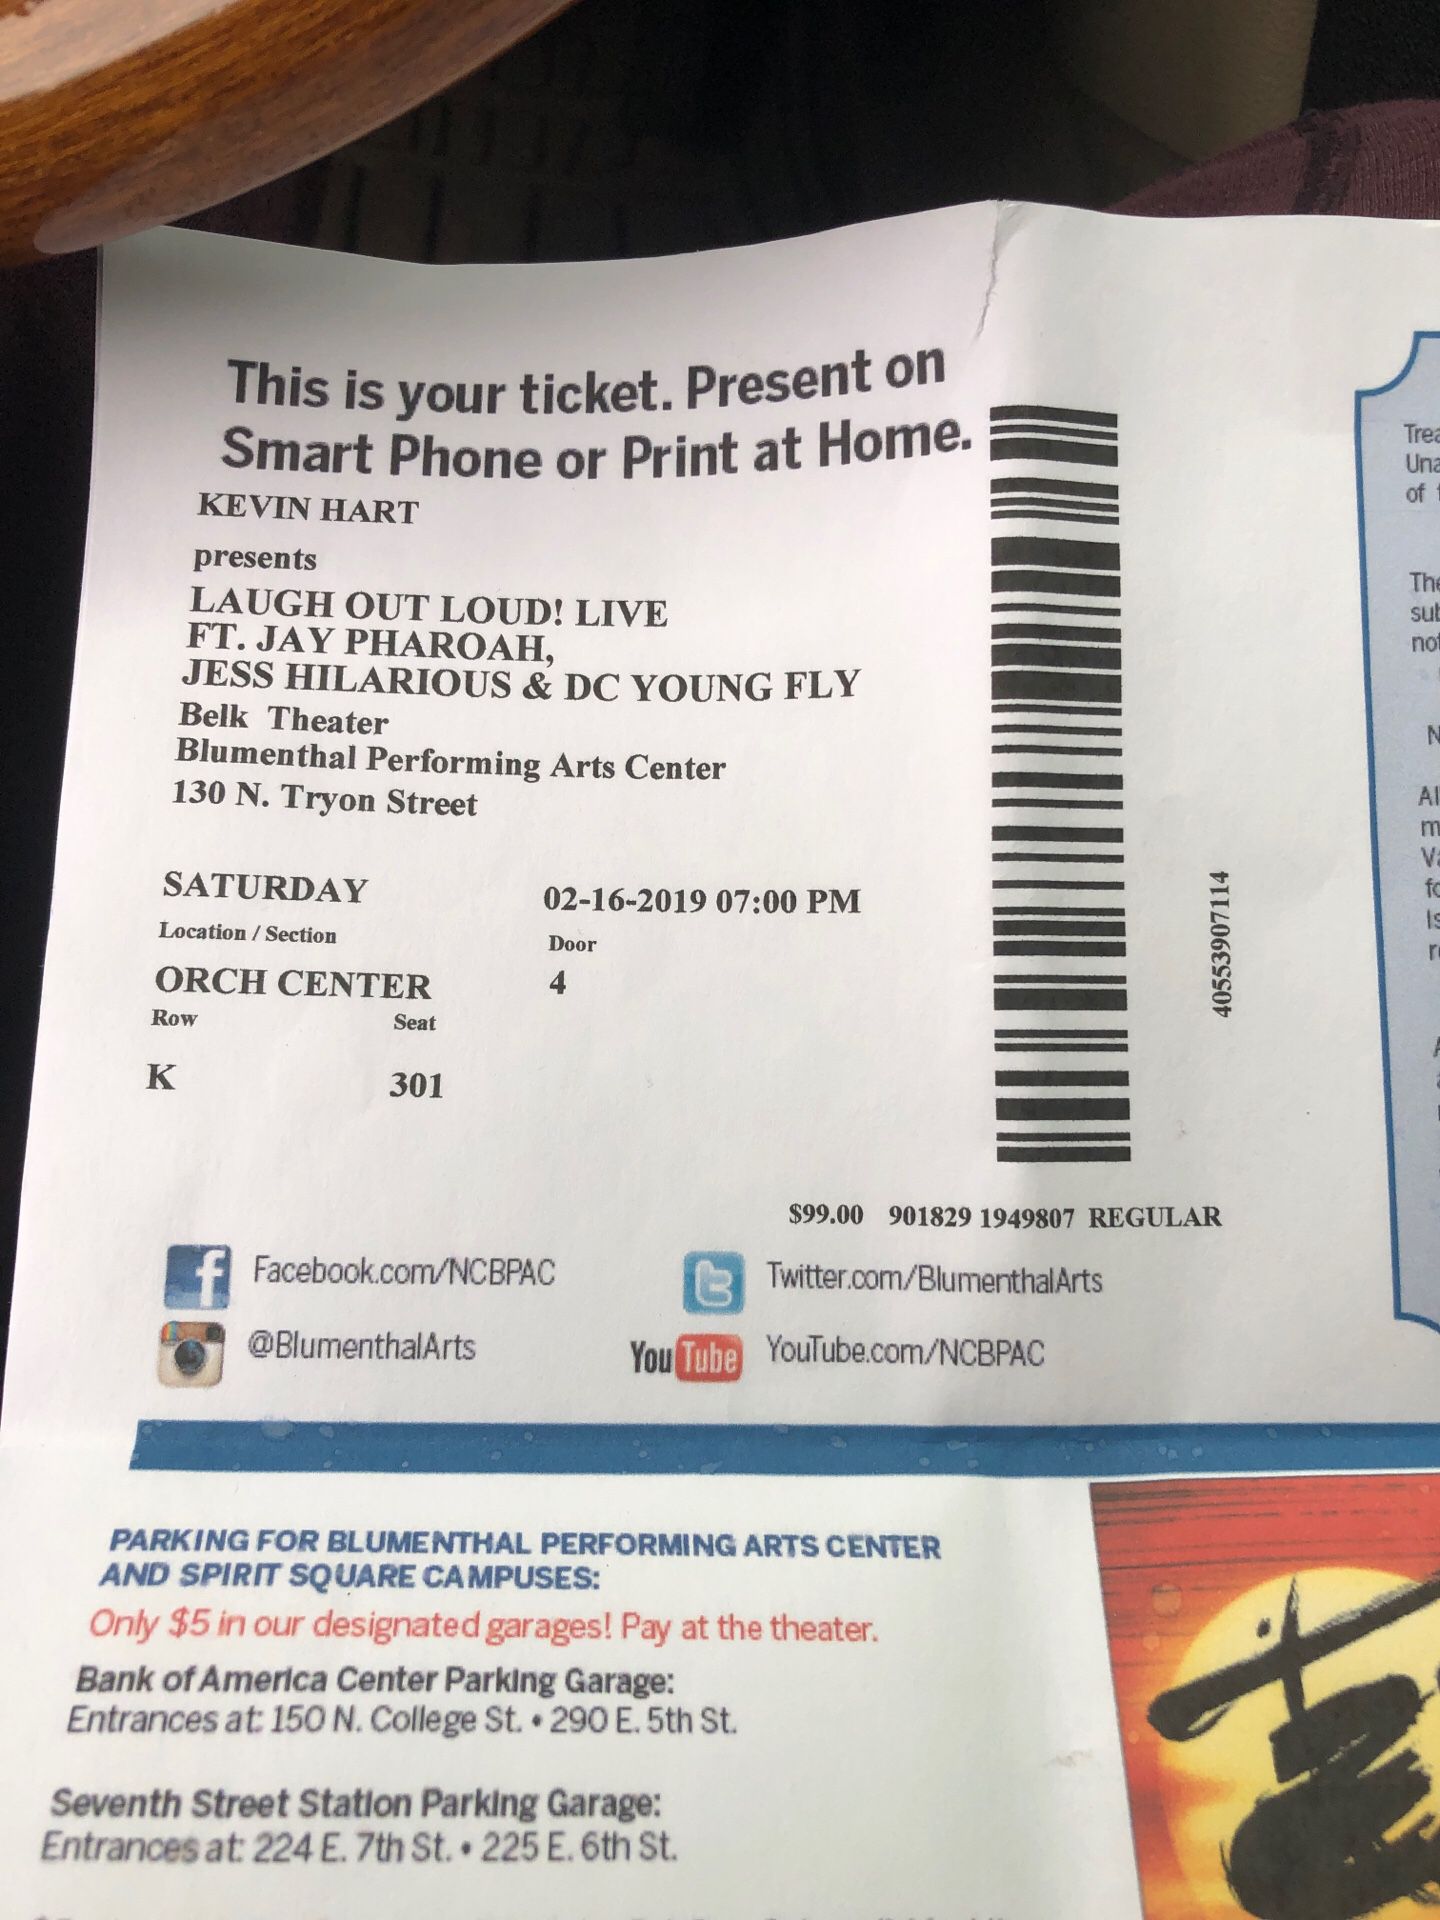 2 tickets to Kevin hart tonight!!